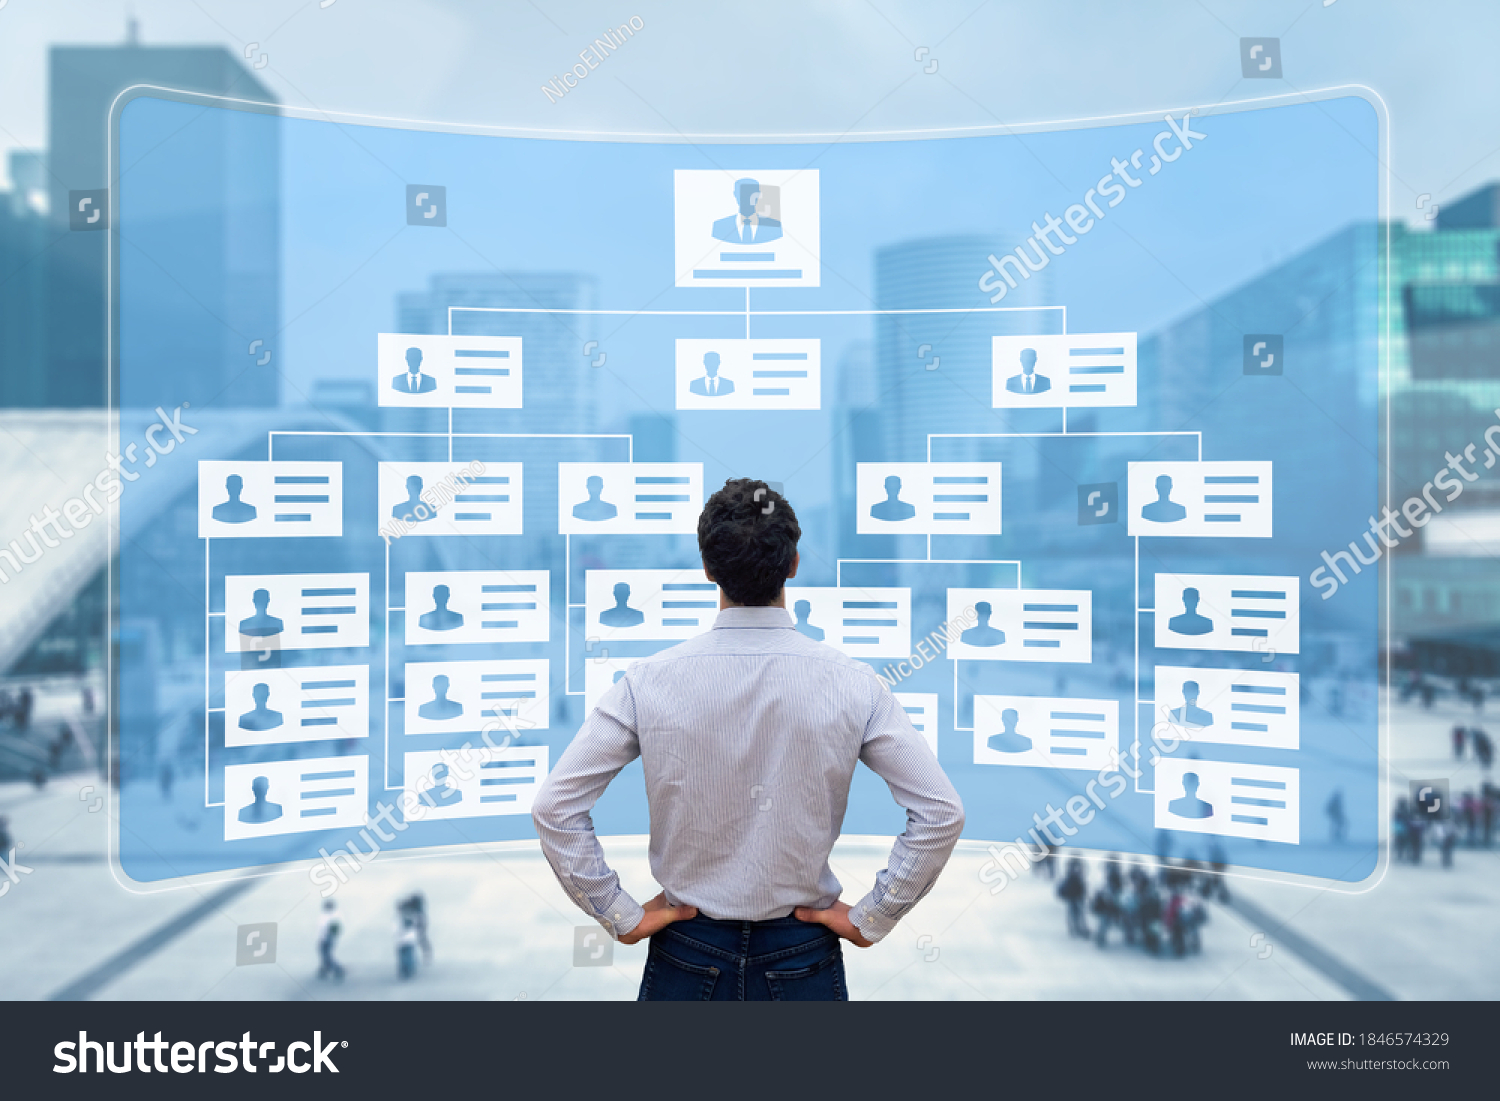 Organization chart showing hierarchy structure of teams in corporation with CEO, directors, executives and employees. Human Resources Manager working with HR organizational diagram, career concept #1846574329